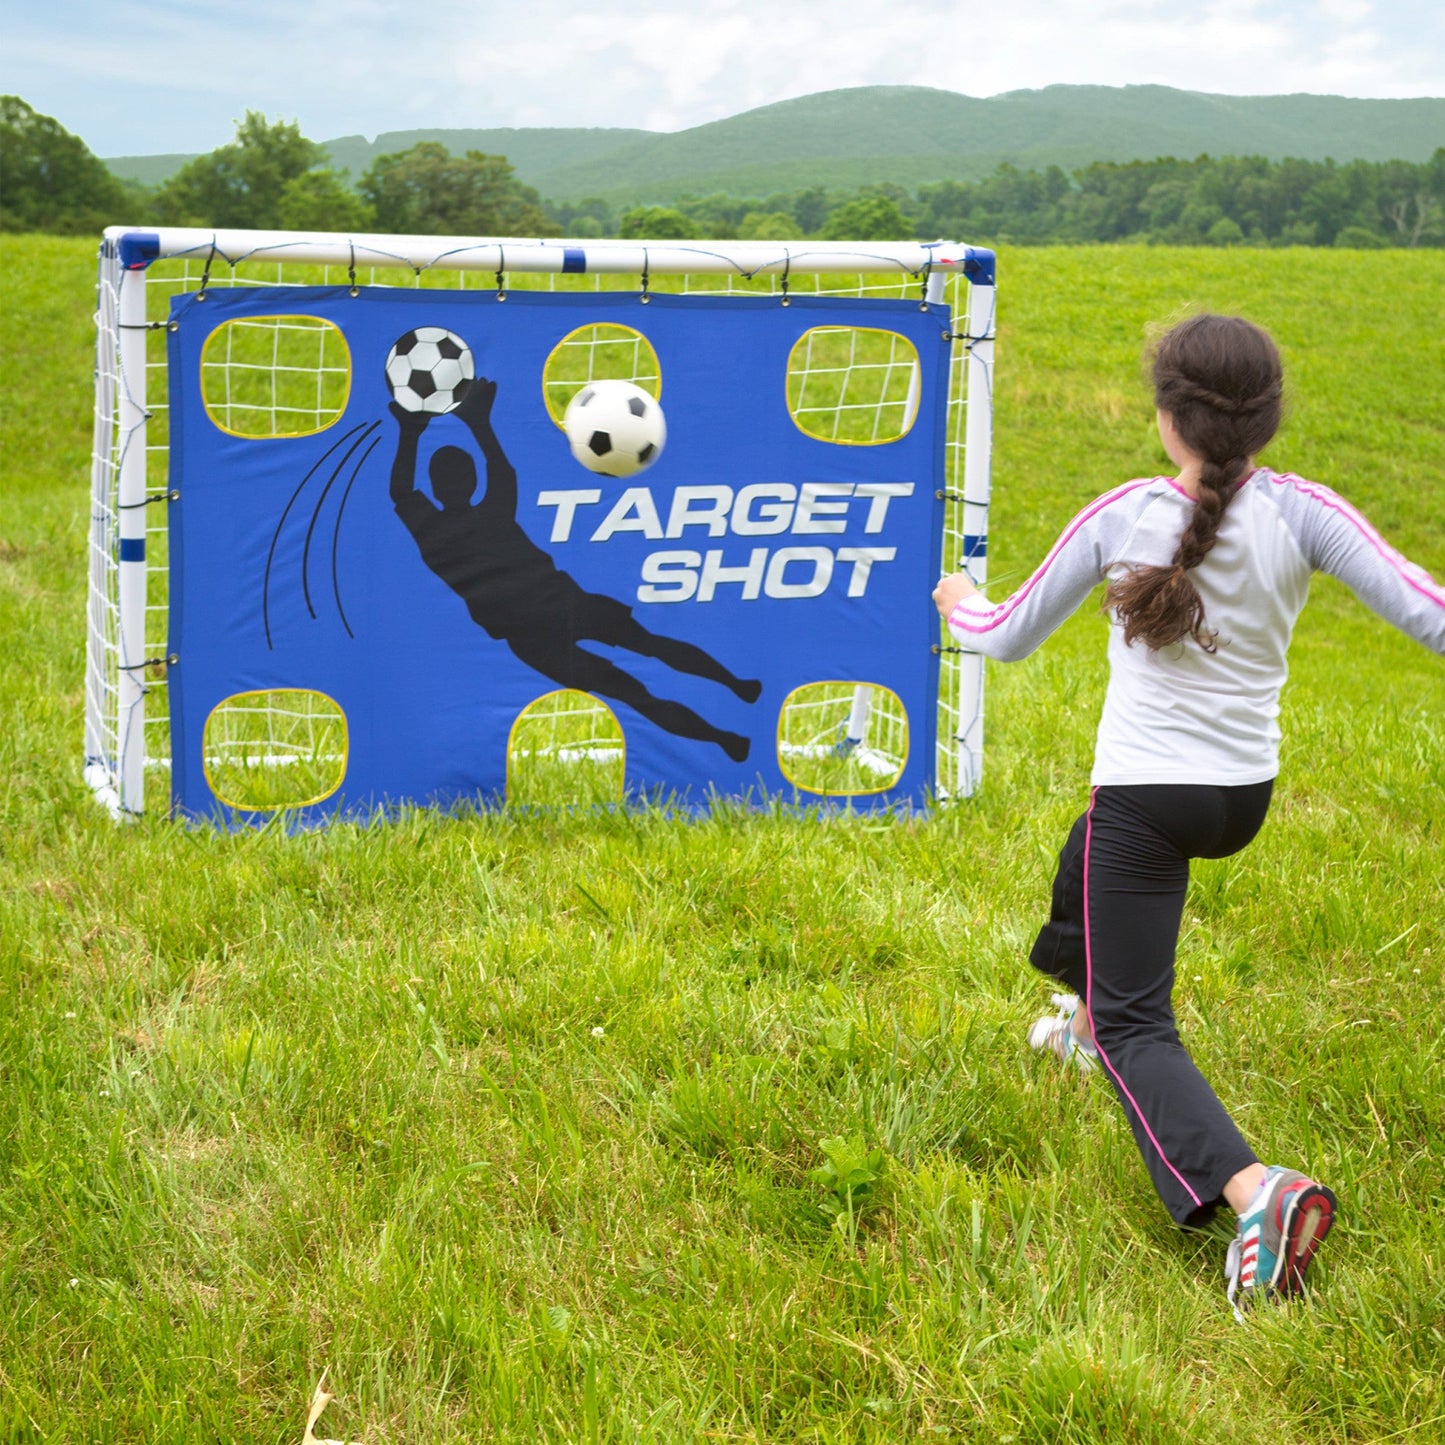 Goal for It! Portable 3-in-1 Pro-style Soccer Trainer Goal